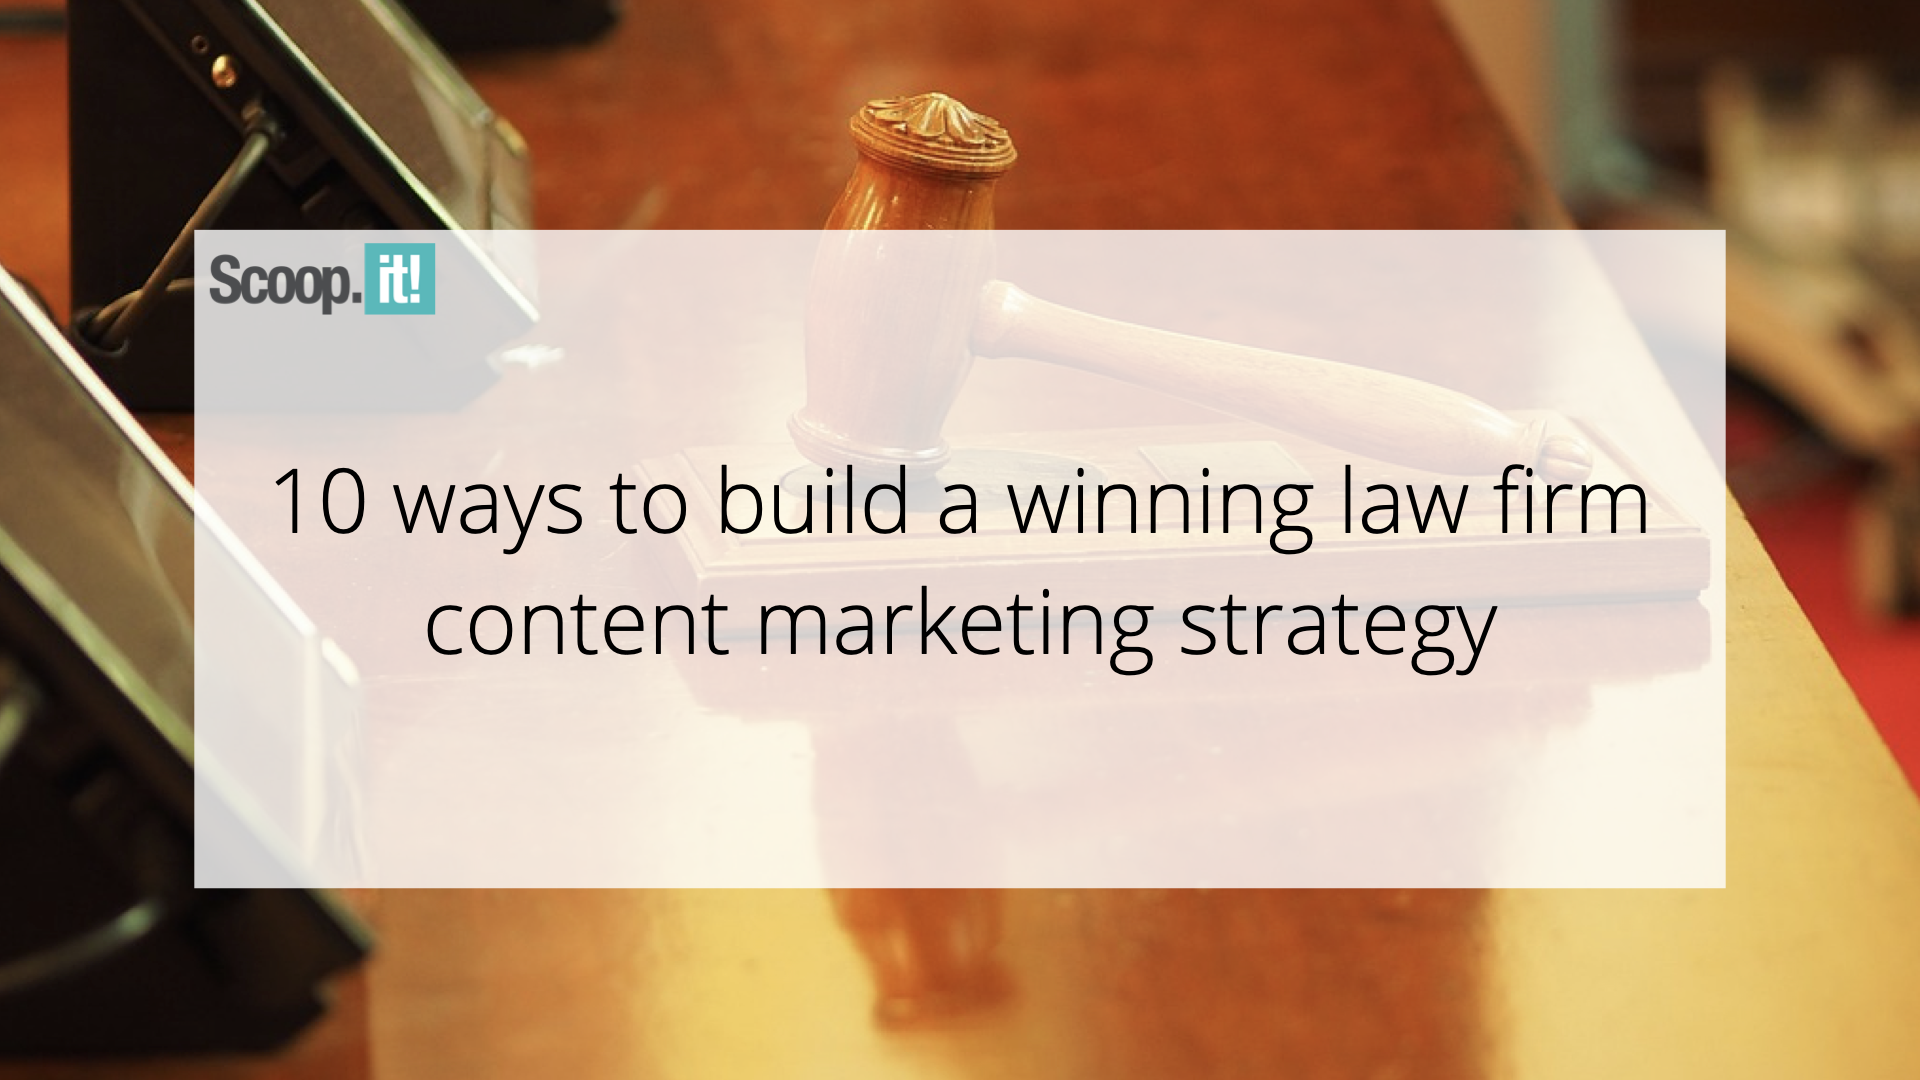 10-ways-to-build-a-winning-law-firm-content-marketing-strategy-–-scoop.it-blog